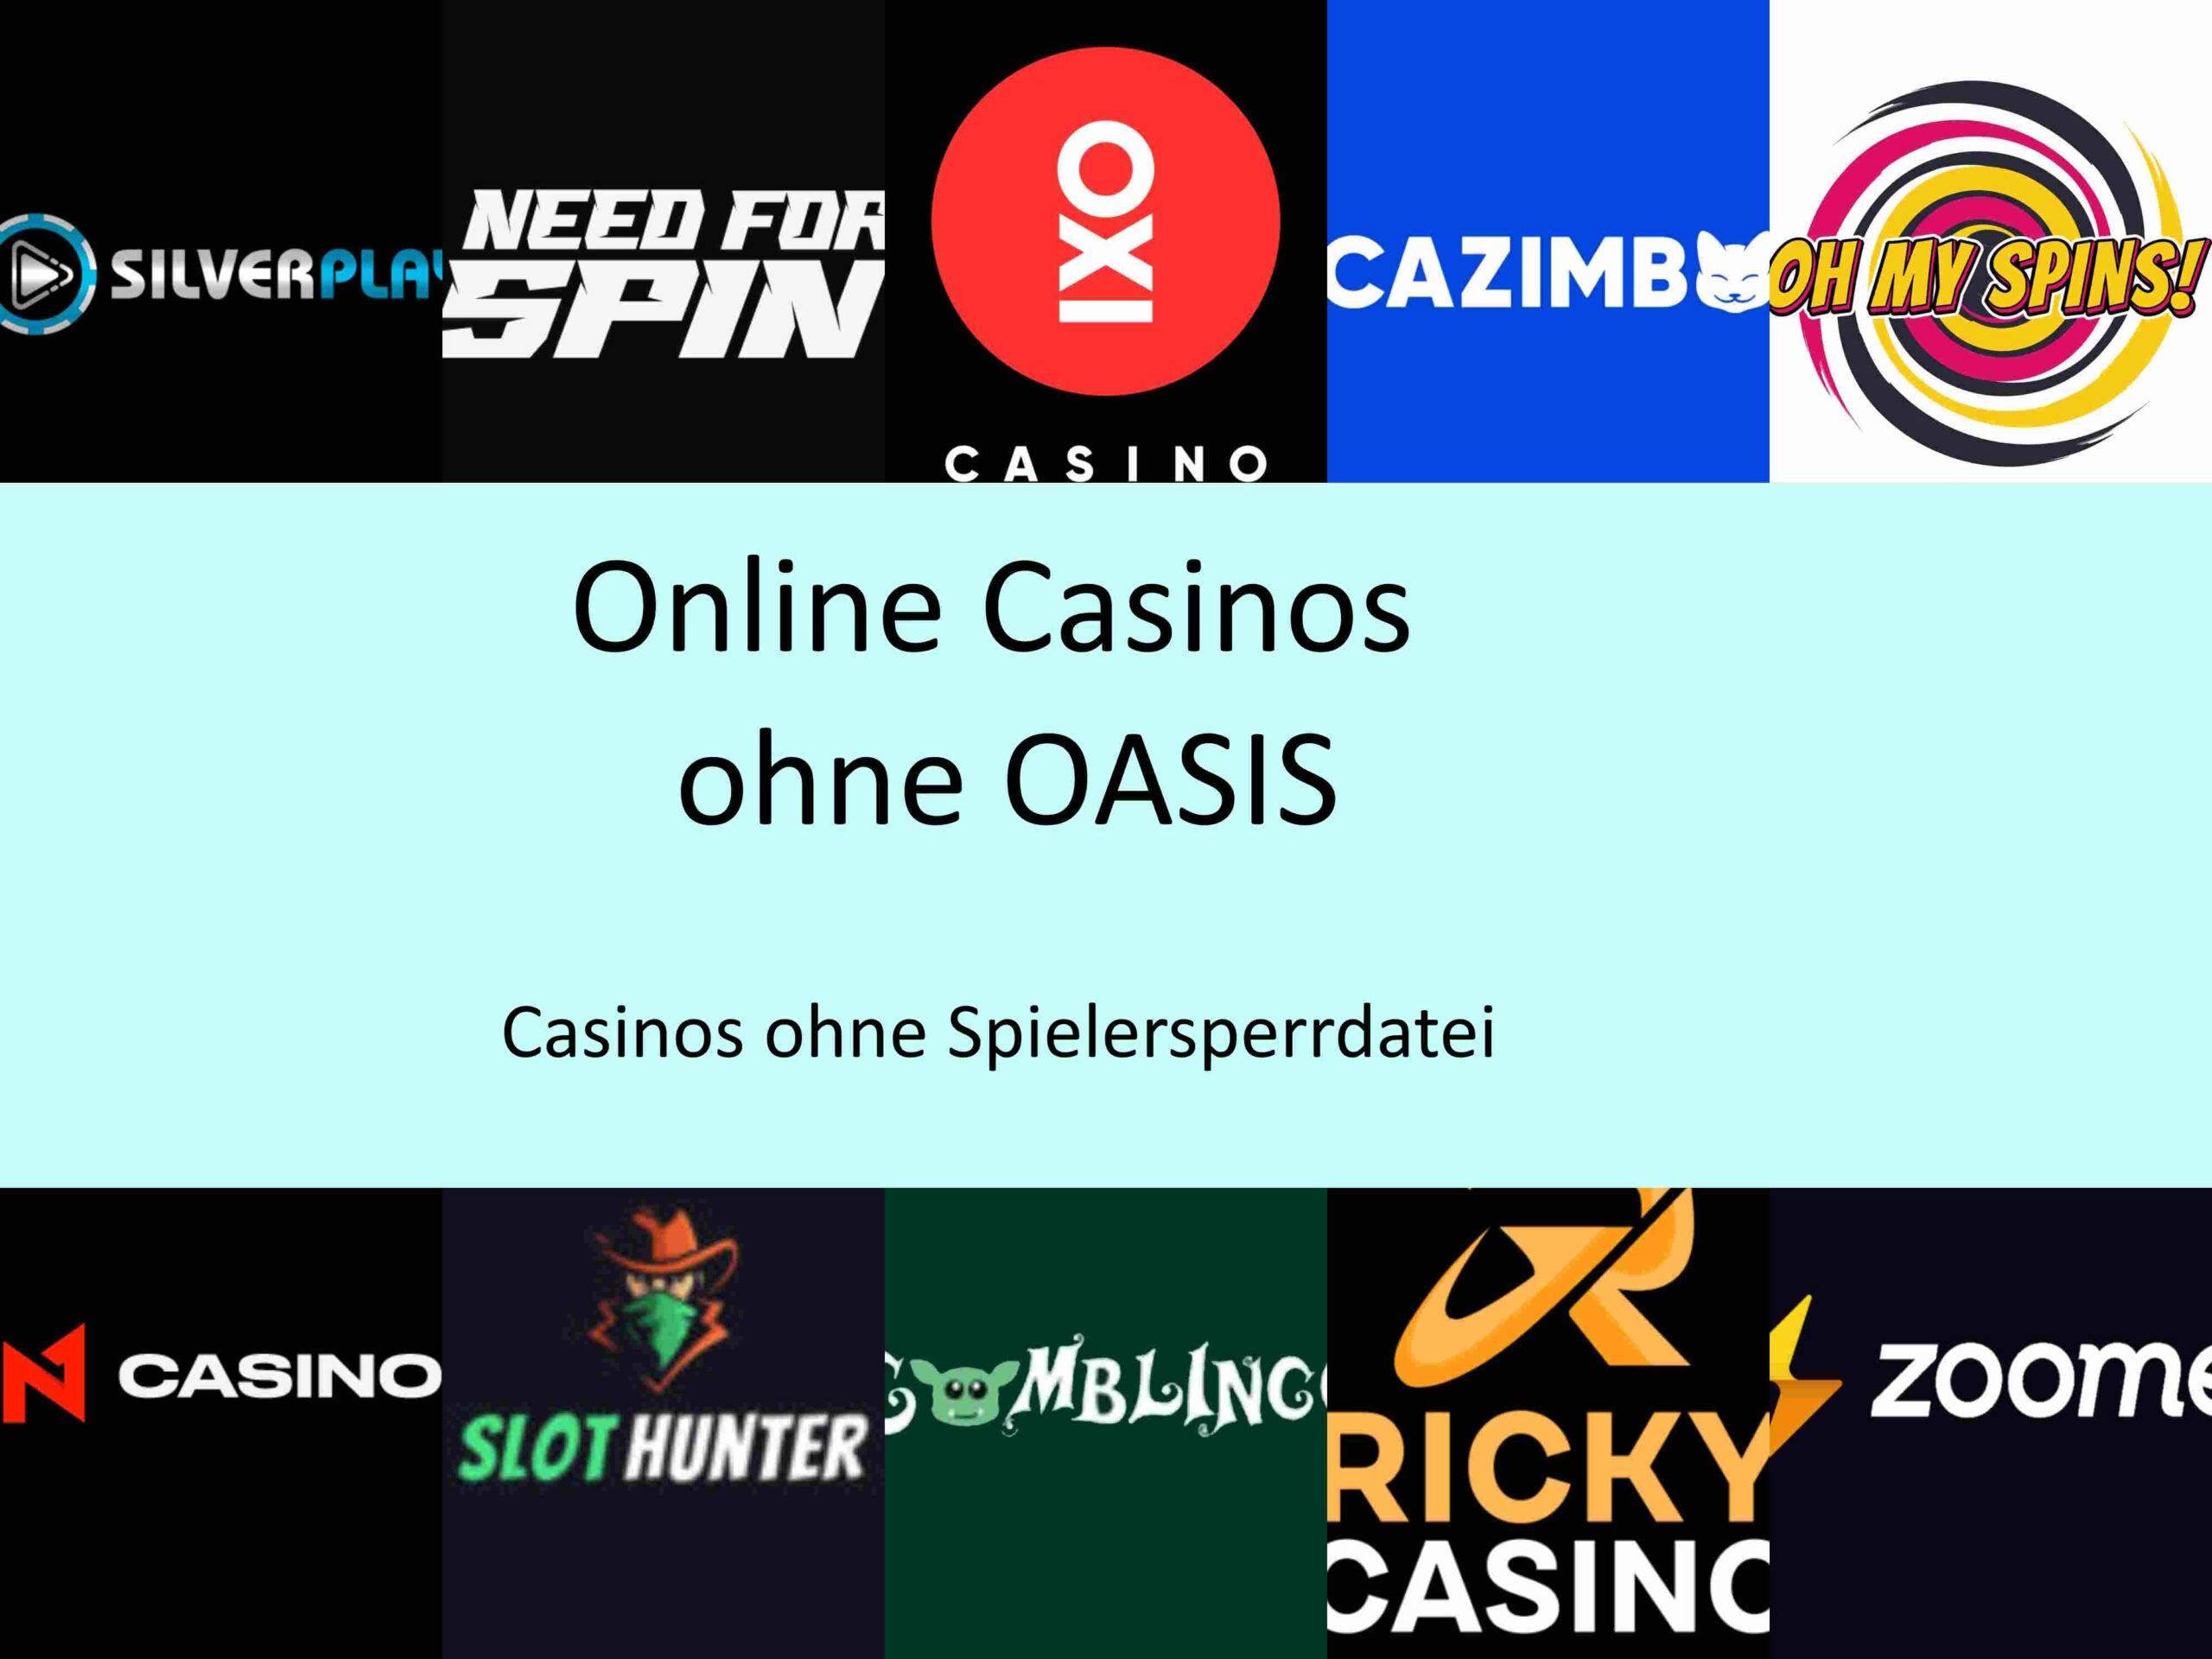 What's New About Seriöse Online Casinos